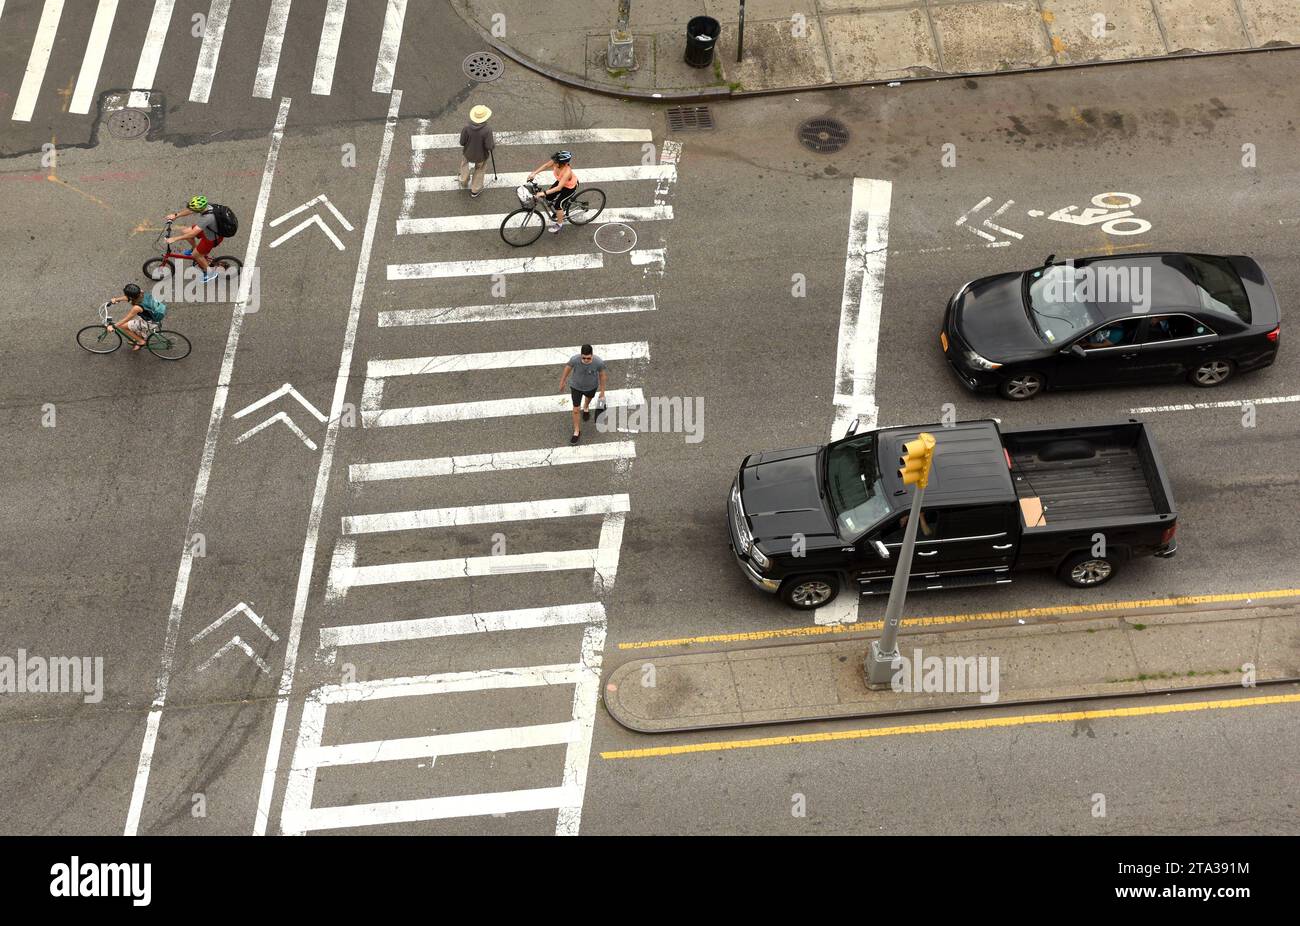 New York, USA - June 9, 2018: People walking on zebra crossings in New York. Top view at the intersection with peope on zebra crossings. Stock Photo